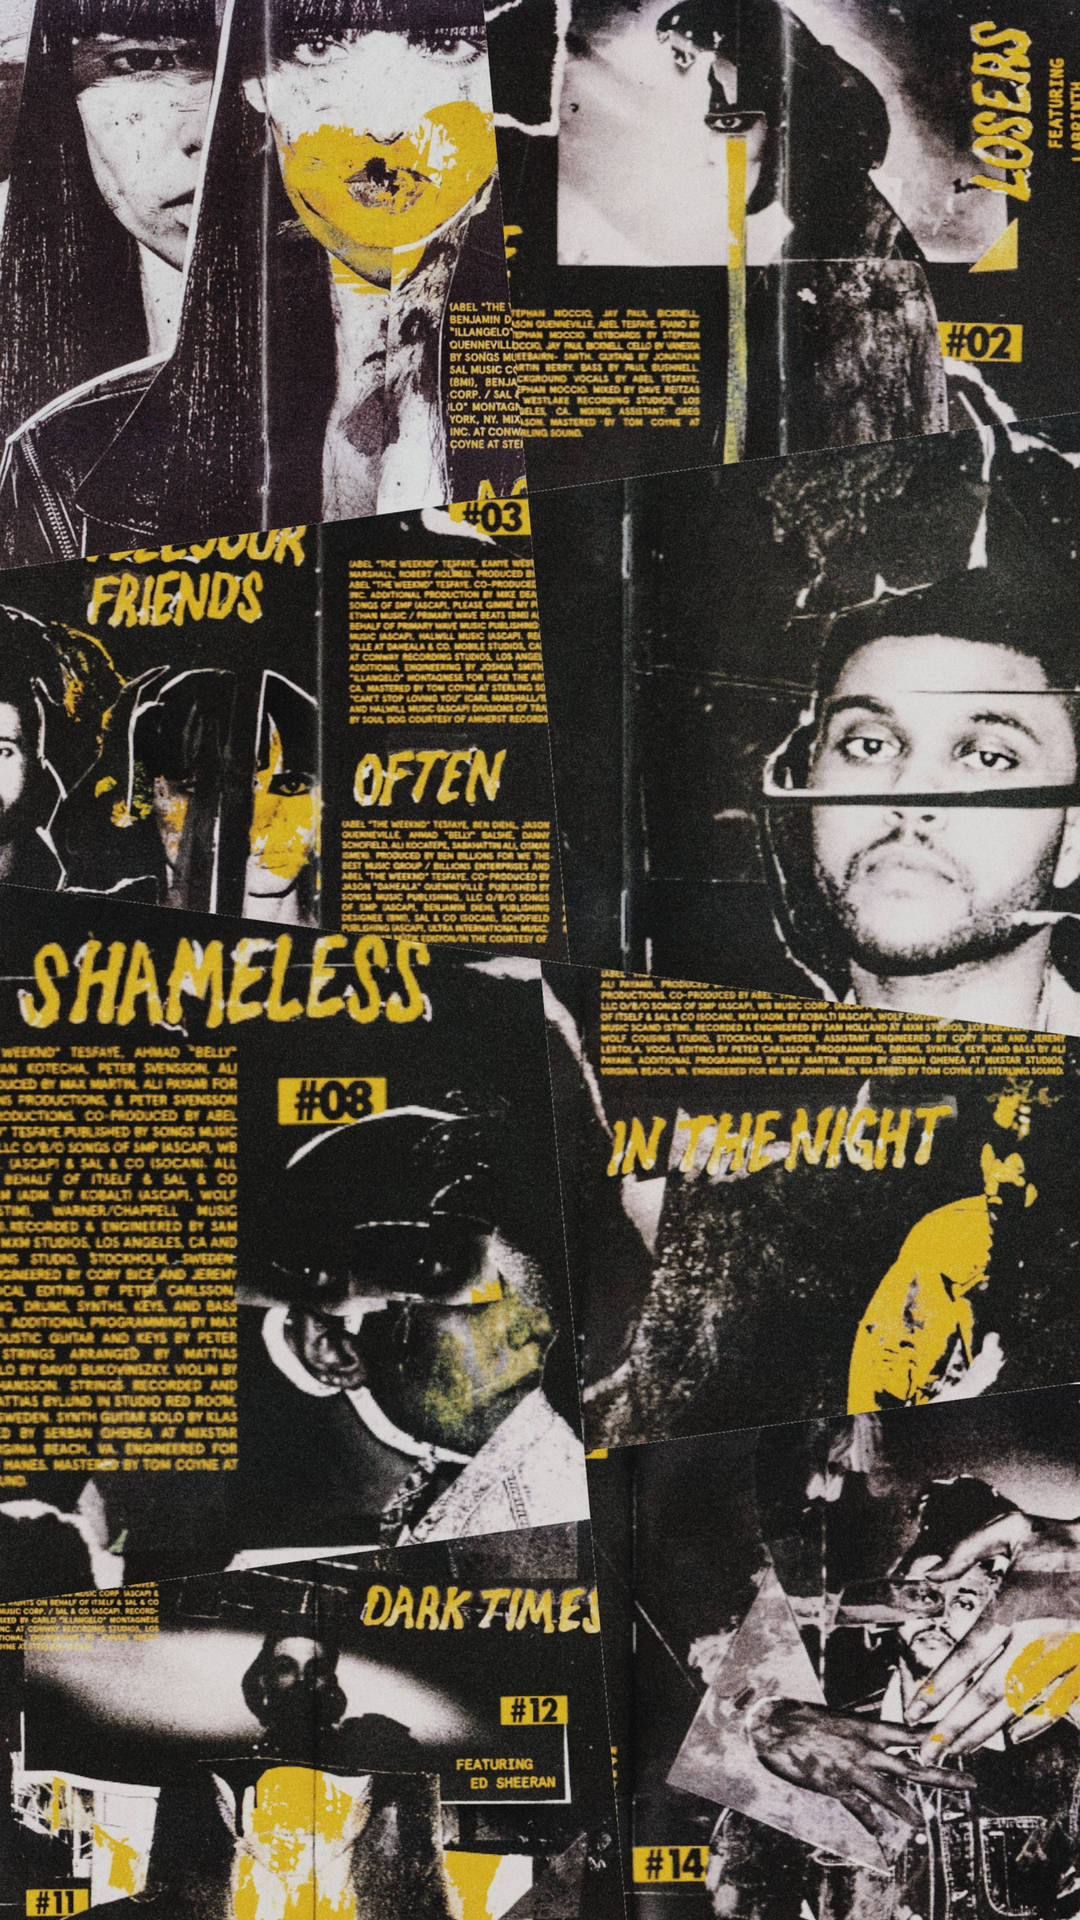 The Weeknd Beauty Behind The Madness Wallpaper